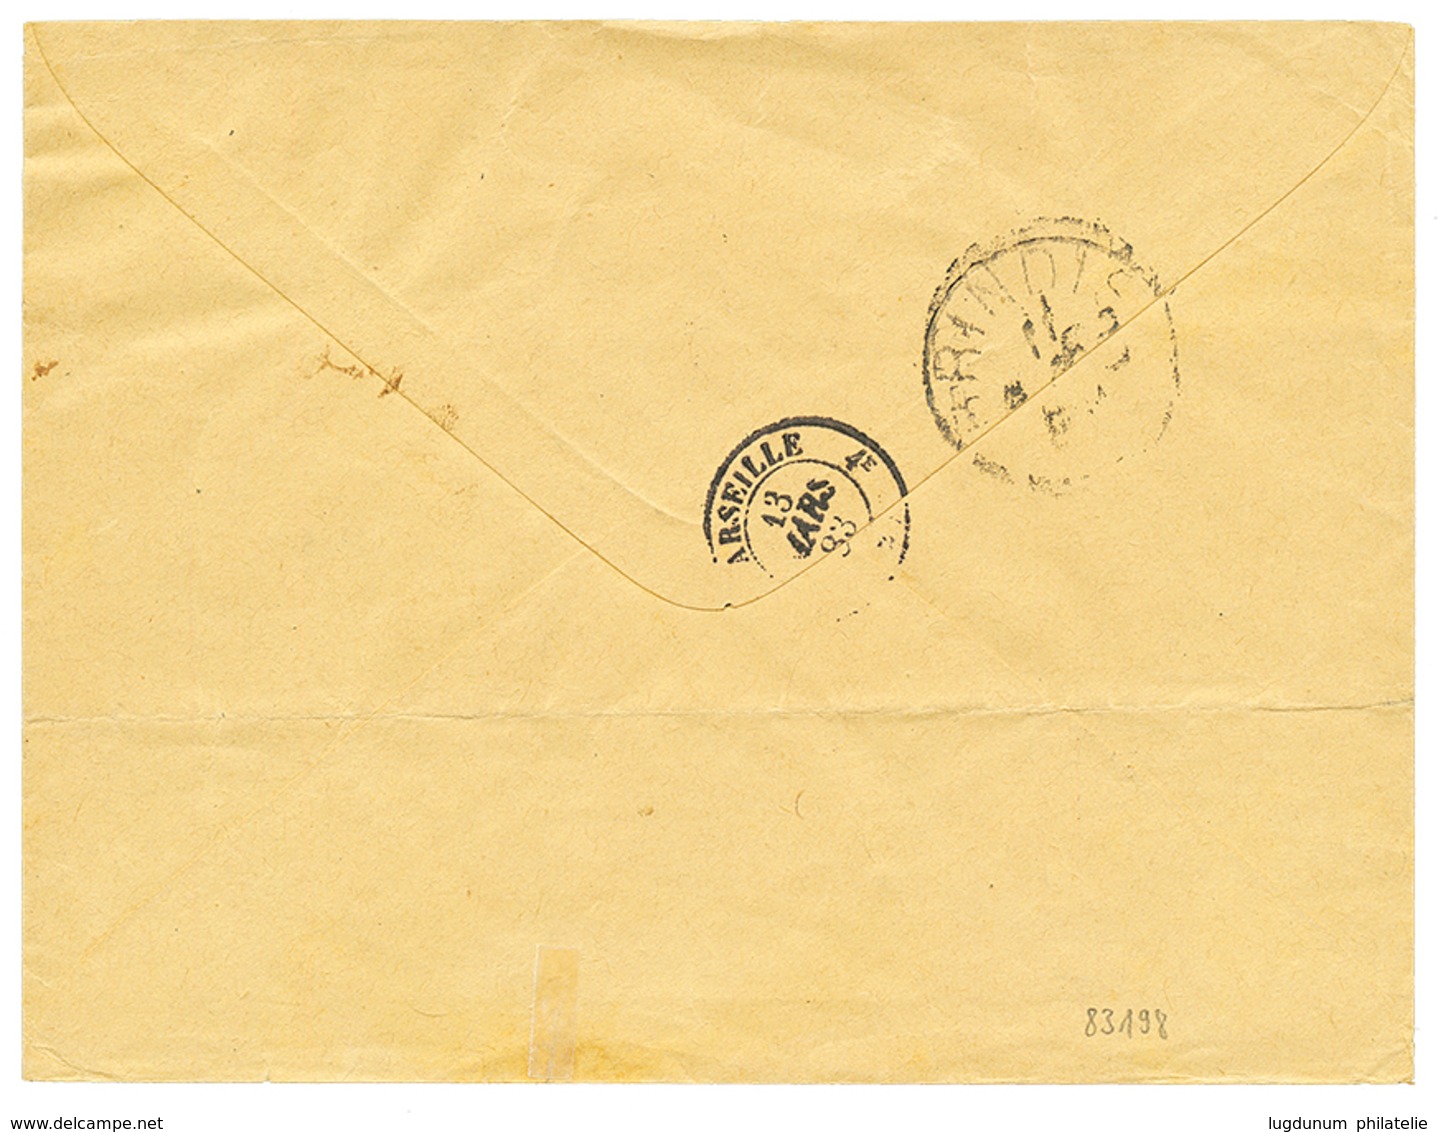 1883 Pair 5 Soldi Canc. CANEA On Envelope To FRANCE. Superb Quality. - Oostenrijkse Levant